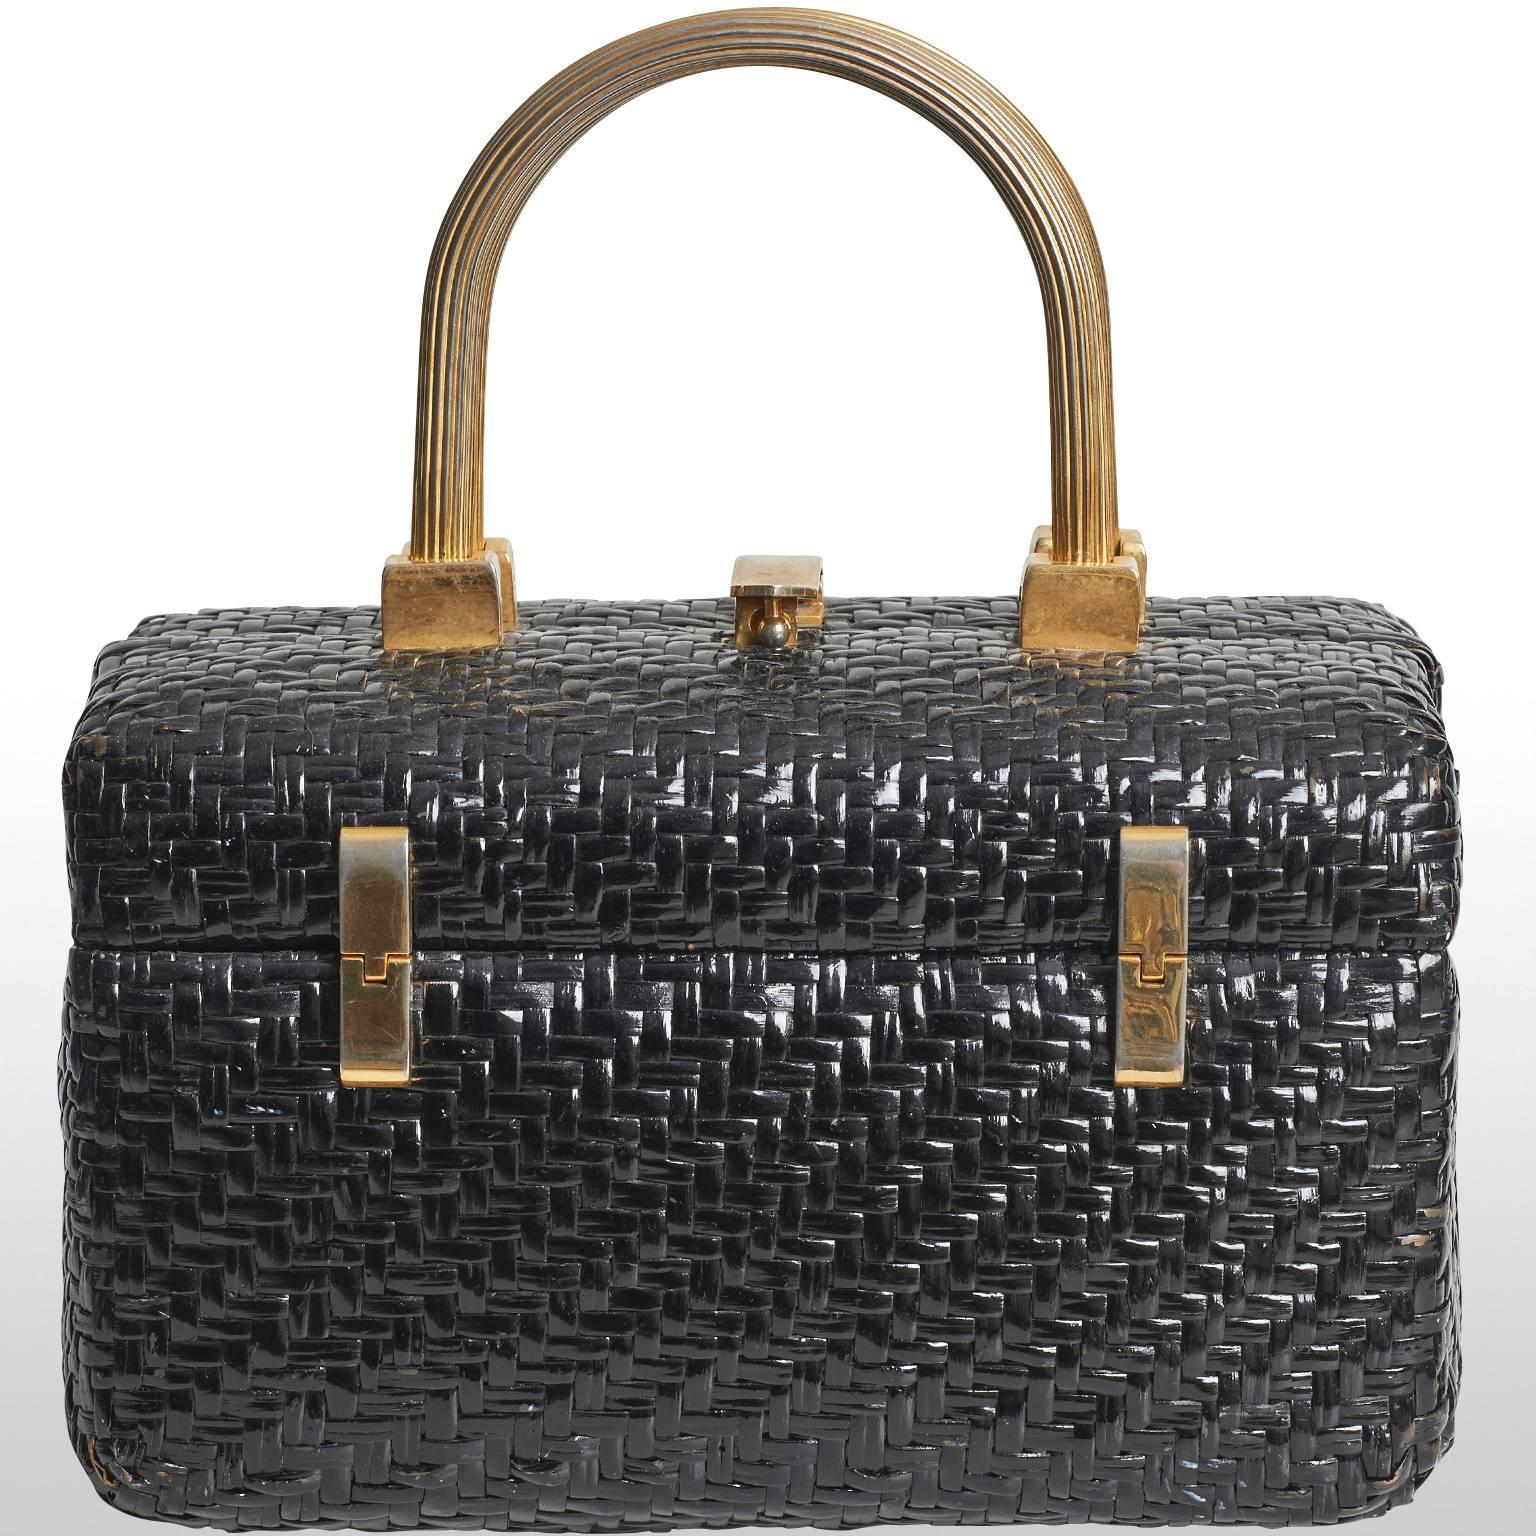 Quirky 1960's box bag with structured gold metal handle.The bag features an interesting woven texture composed of a black wicker material and opens like an old fashioned jewellry box adding a hint of nostalgia. The boxy shape exudes classic 1960s